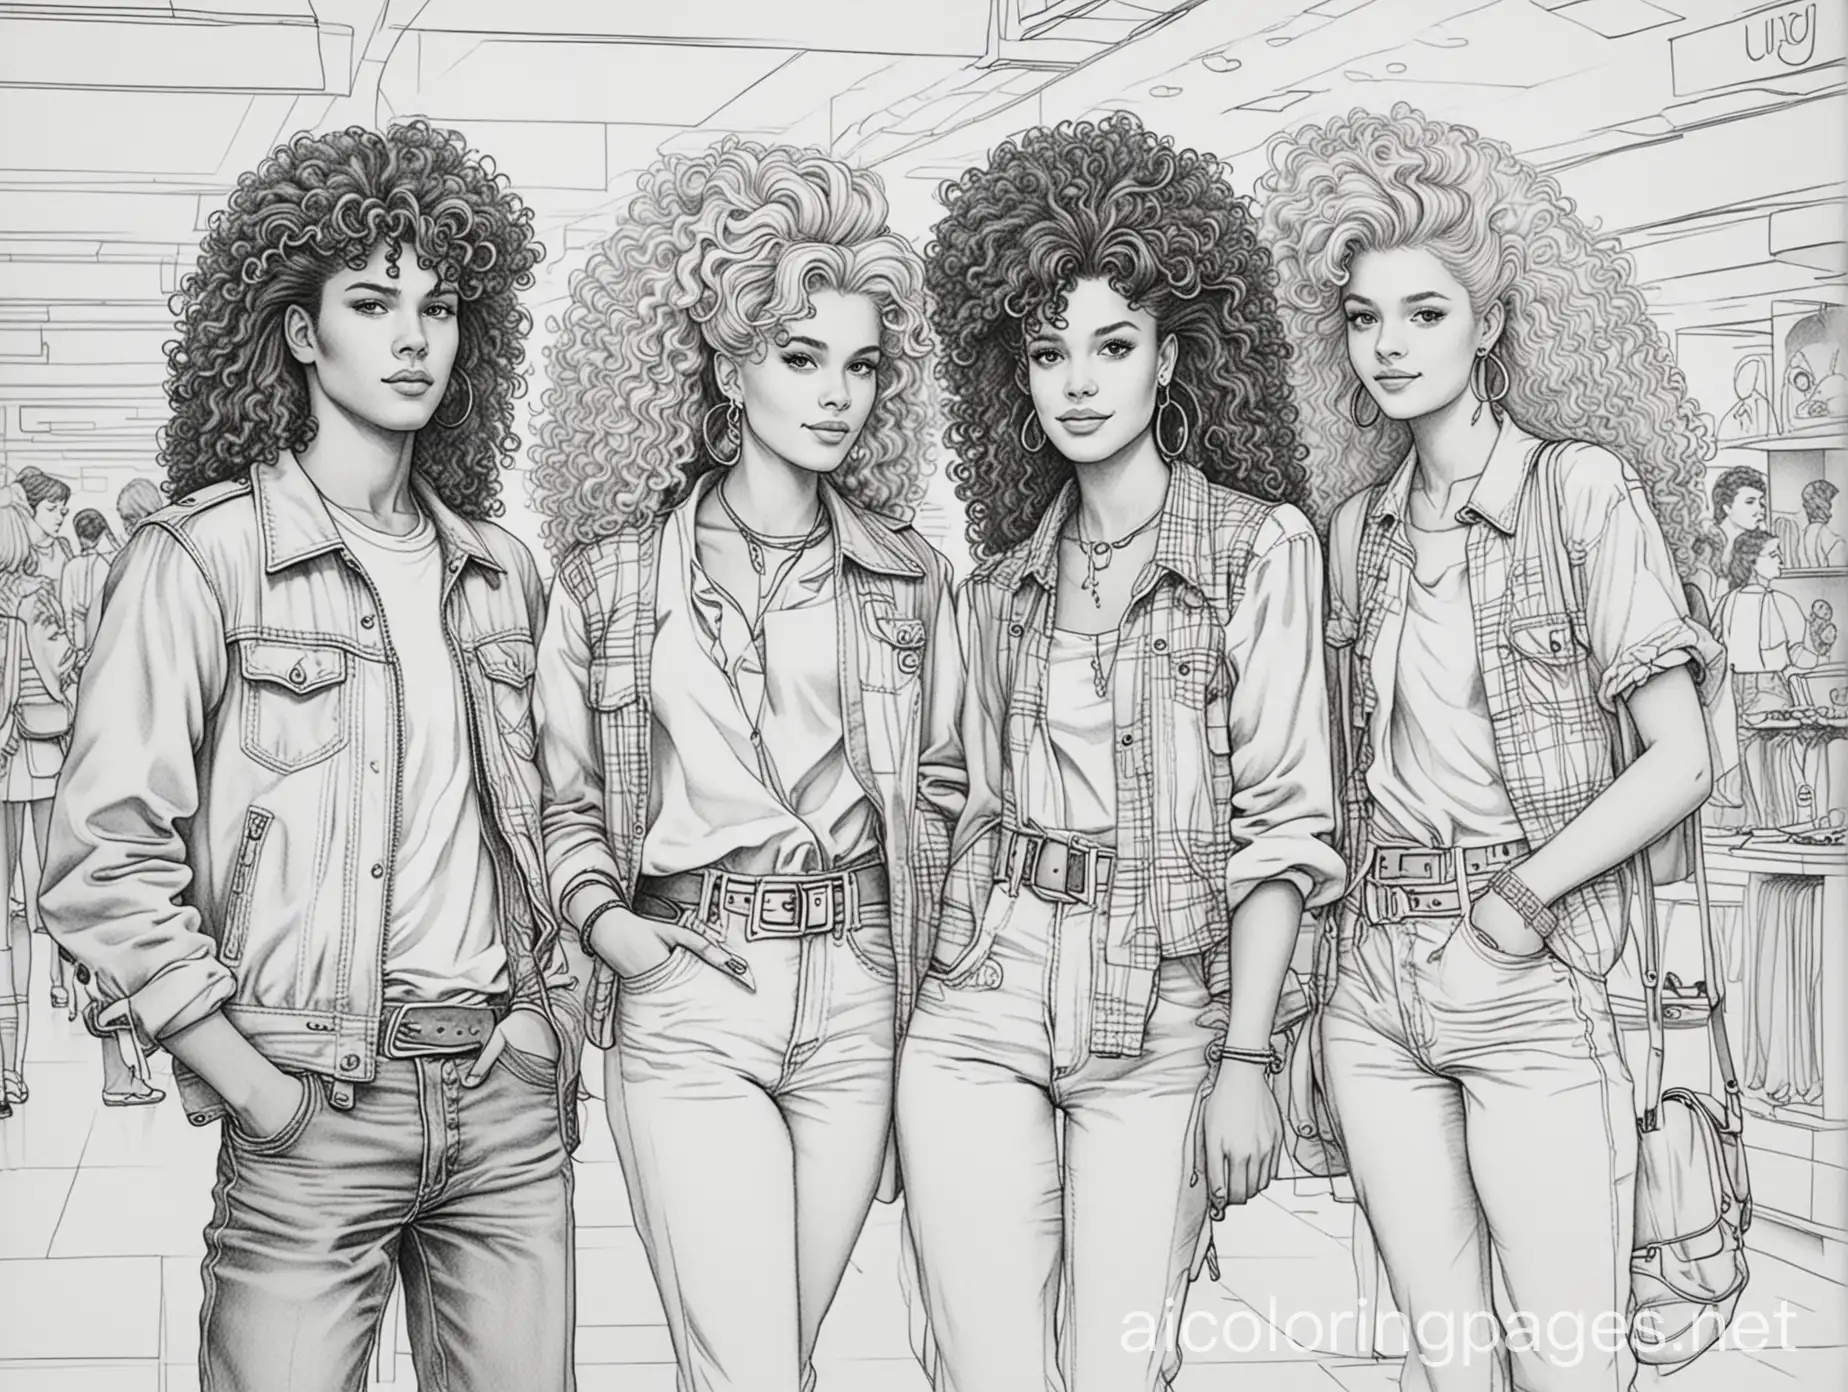 A coloring Page that shows a scene straight out of the 1980s. Teenagers hanging out at the mall dressed in all of their 80s attire and big hair, Coloring Page, black and white, line art, white background, Simplicity, Ample White Space. The background of the coloring page is plain white to make it easy for young children to color within the lines. The outlines of all the subjects are easy to distinguish, making it simple for kids to color without too much difficulty